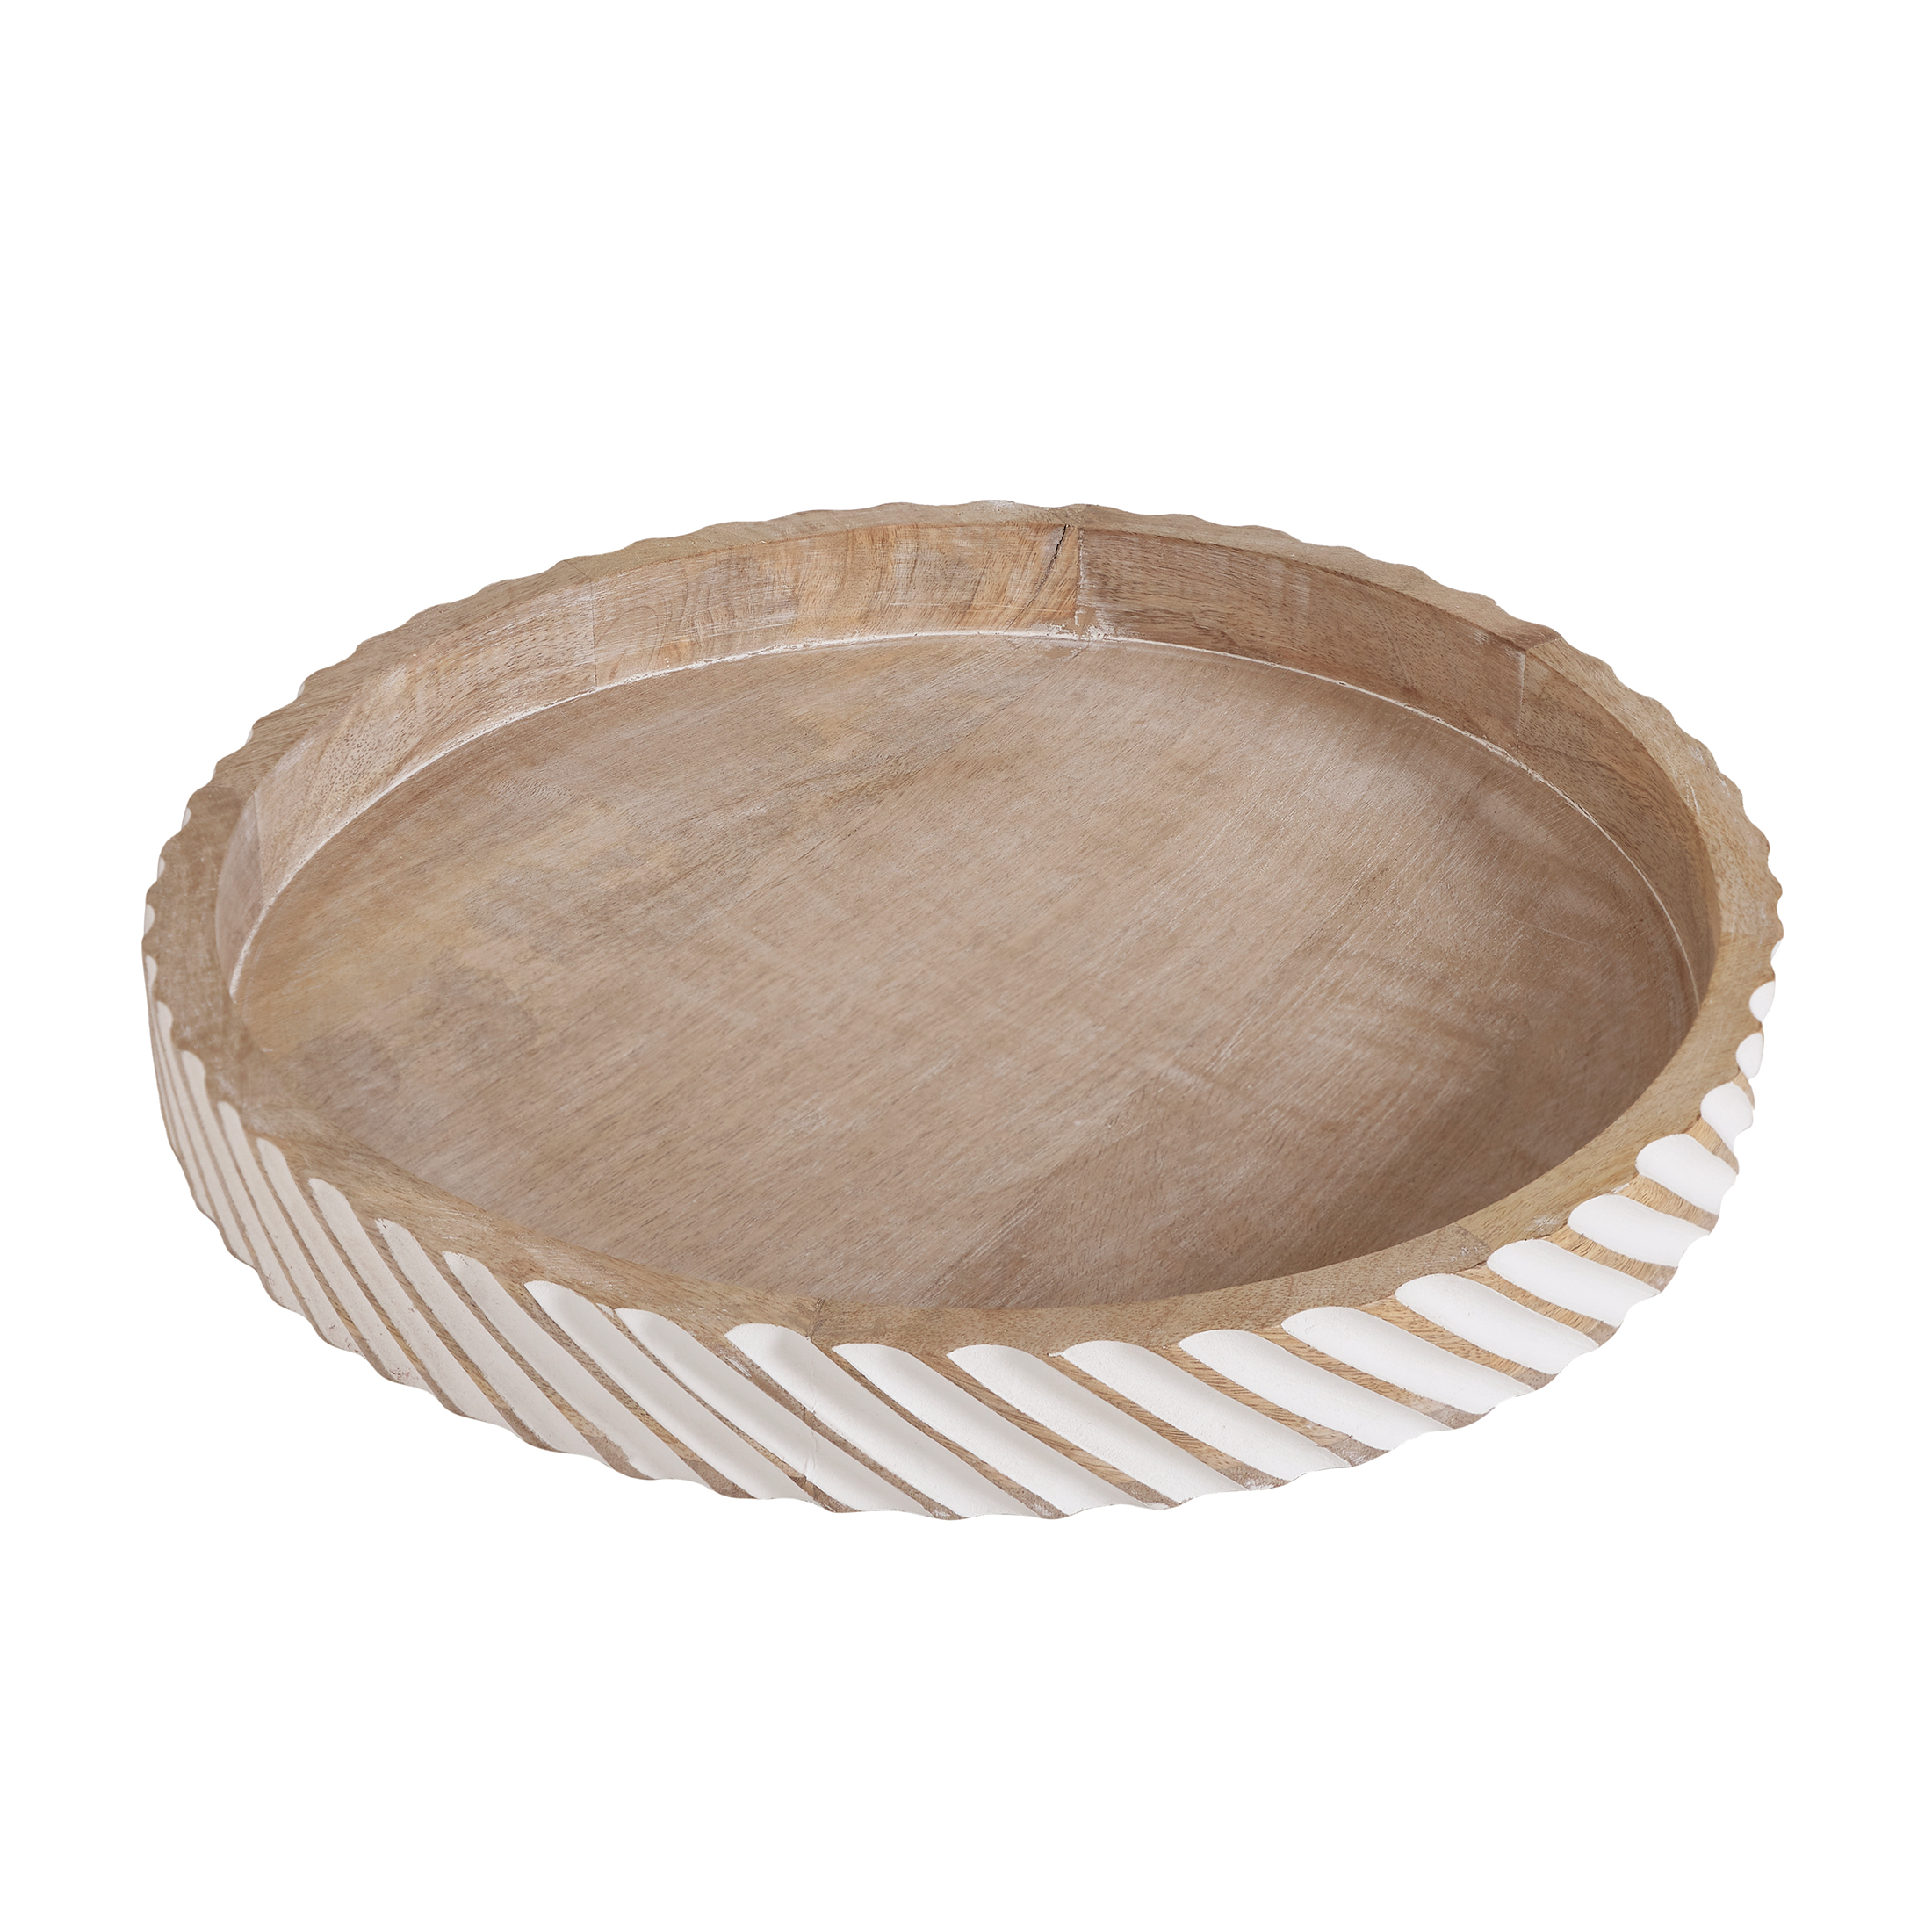 My Texas House 16" Natural White Diagonal Round Wood Decorative Tray - image 1 of 5